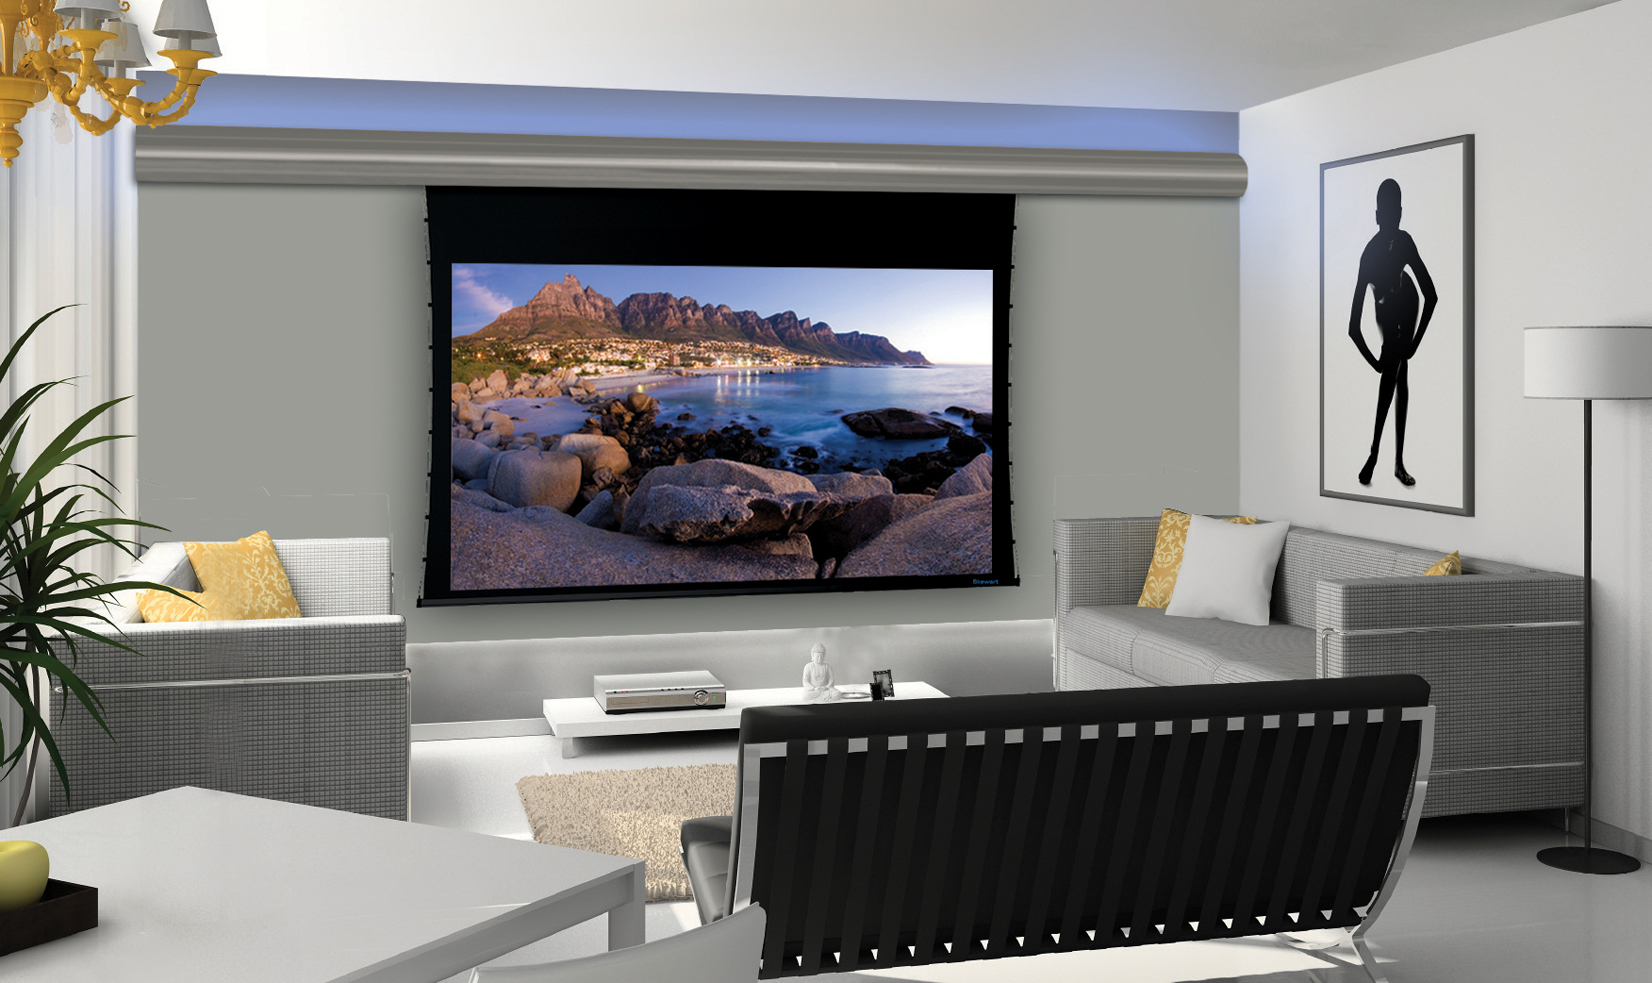 Sleek and contemporary design makes it possible to install a front projection system into any size space.